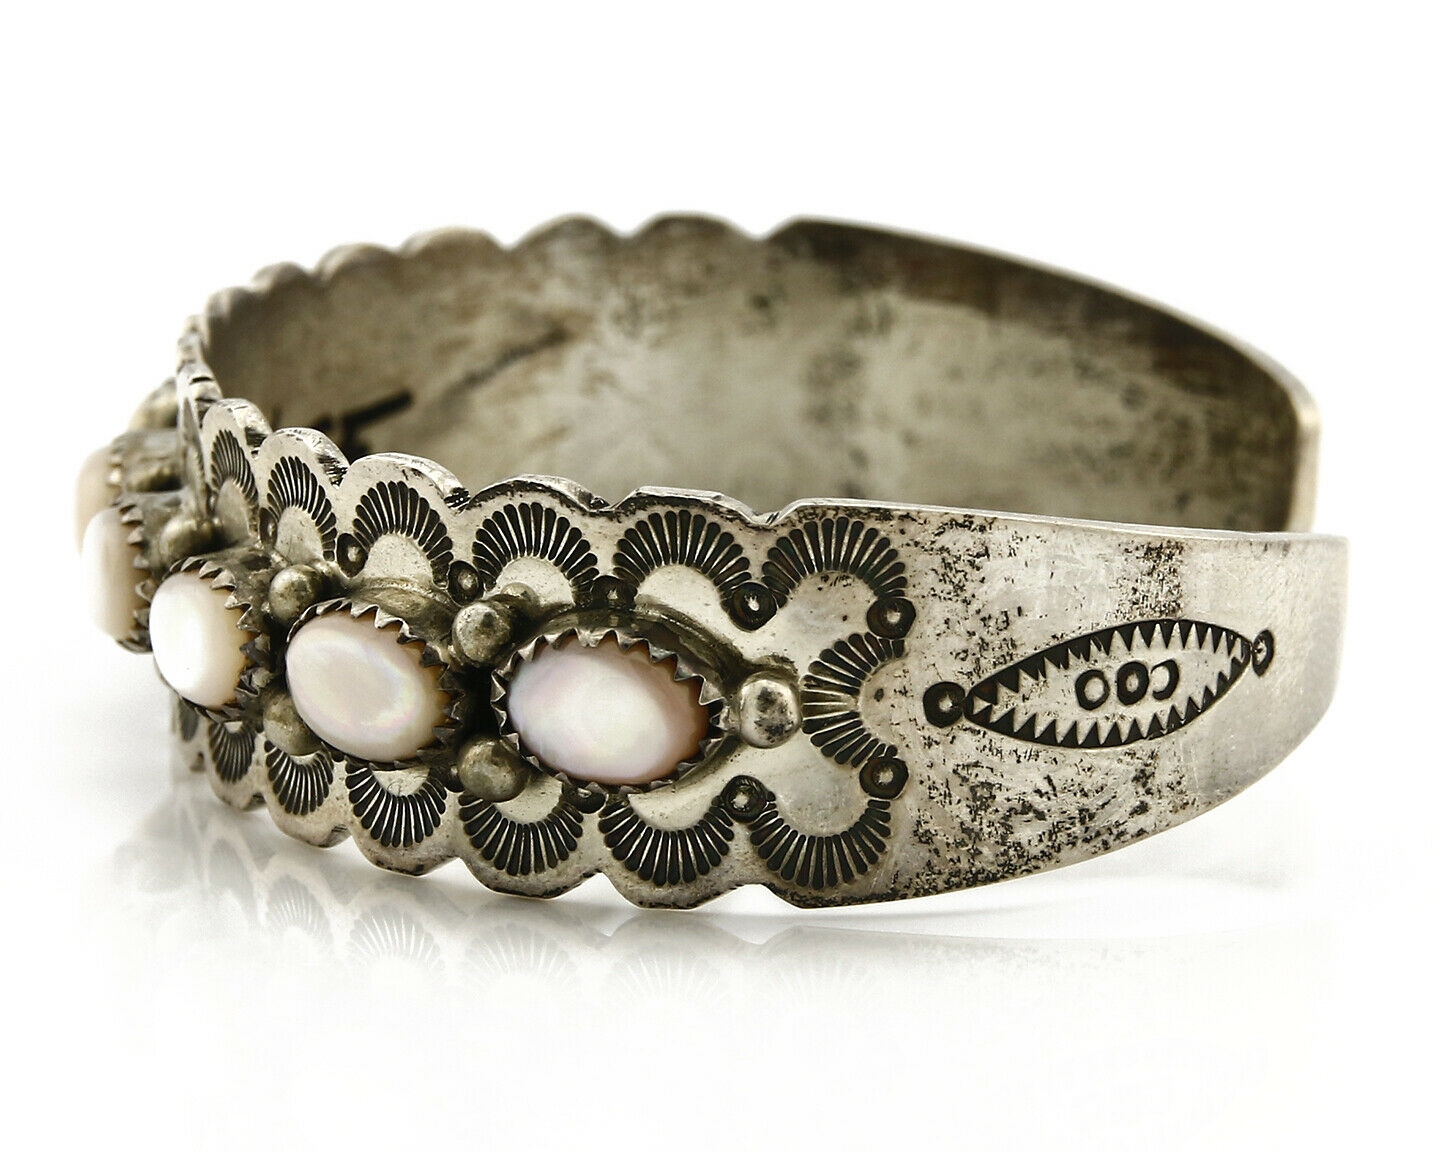 Women's Navajo Bracelet .925 Silver Natural Pink Mussel Cuff Signed Carlos C80's